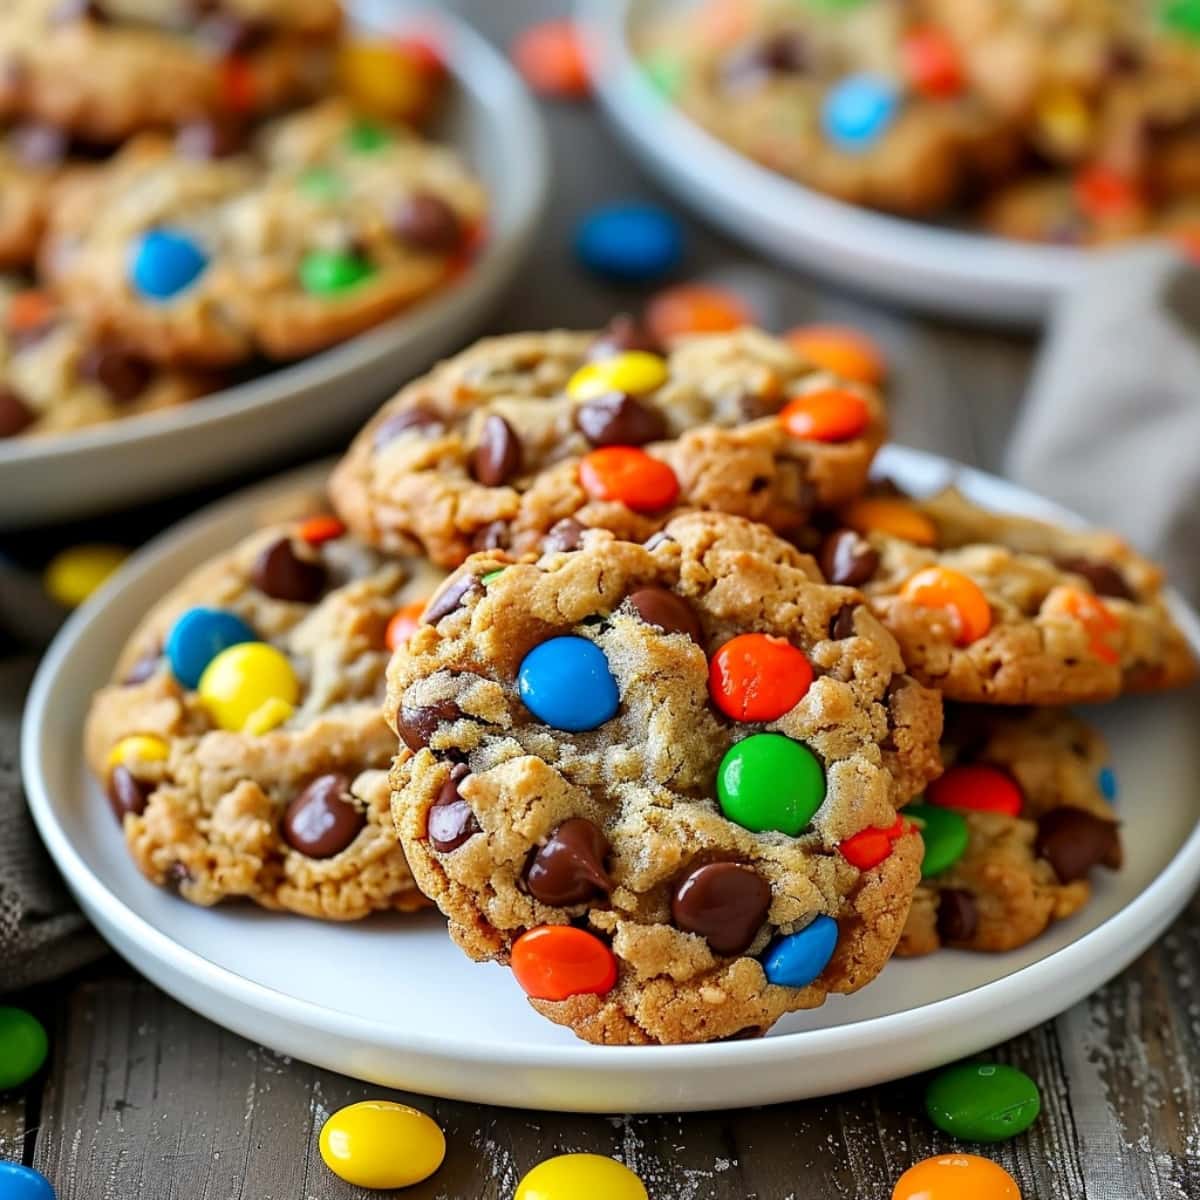 Sweet, salty and chewy monster cookies with M&M candies and chocolate chips